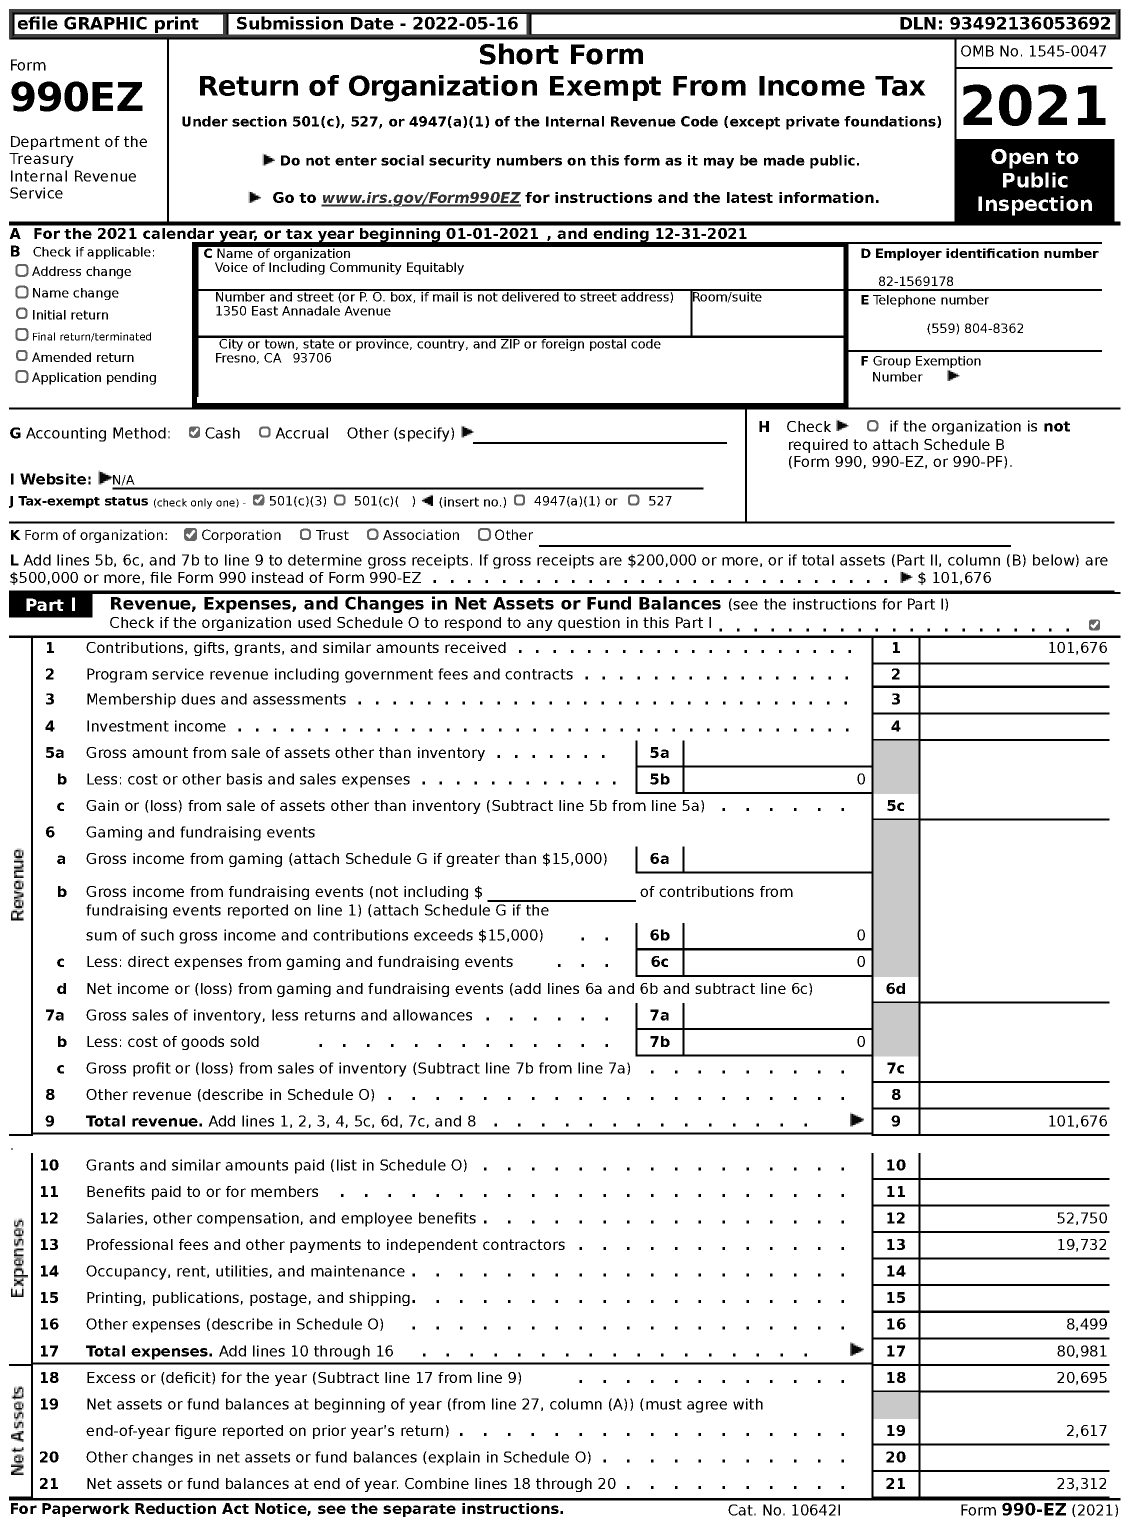 Image of first page of 2021 Form 990EZ for Voice of Including Community Equitably